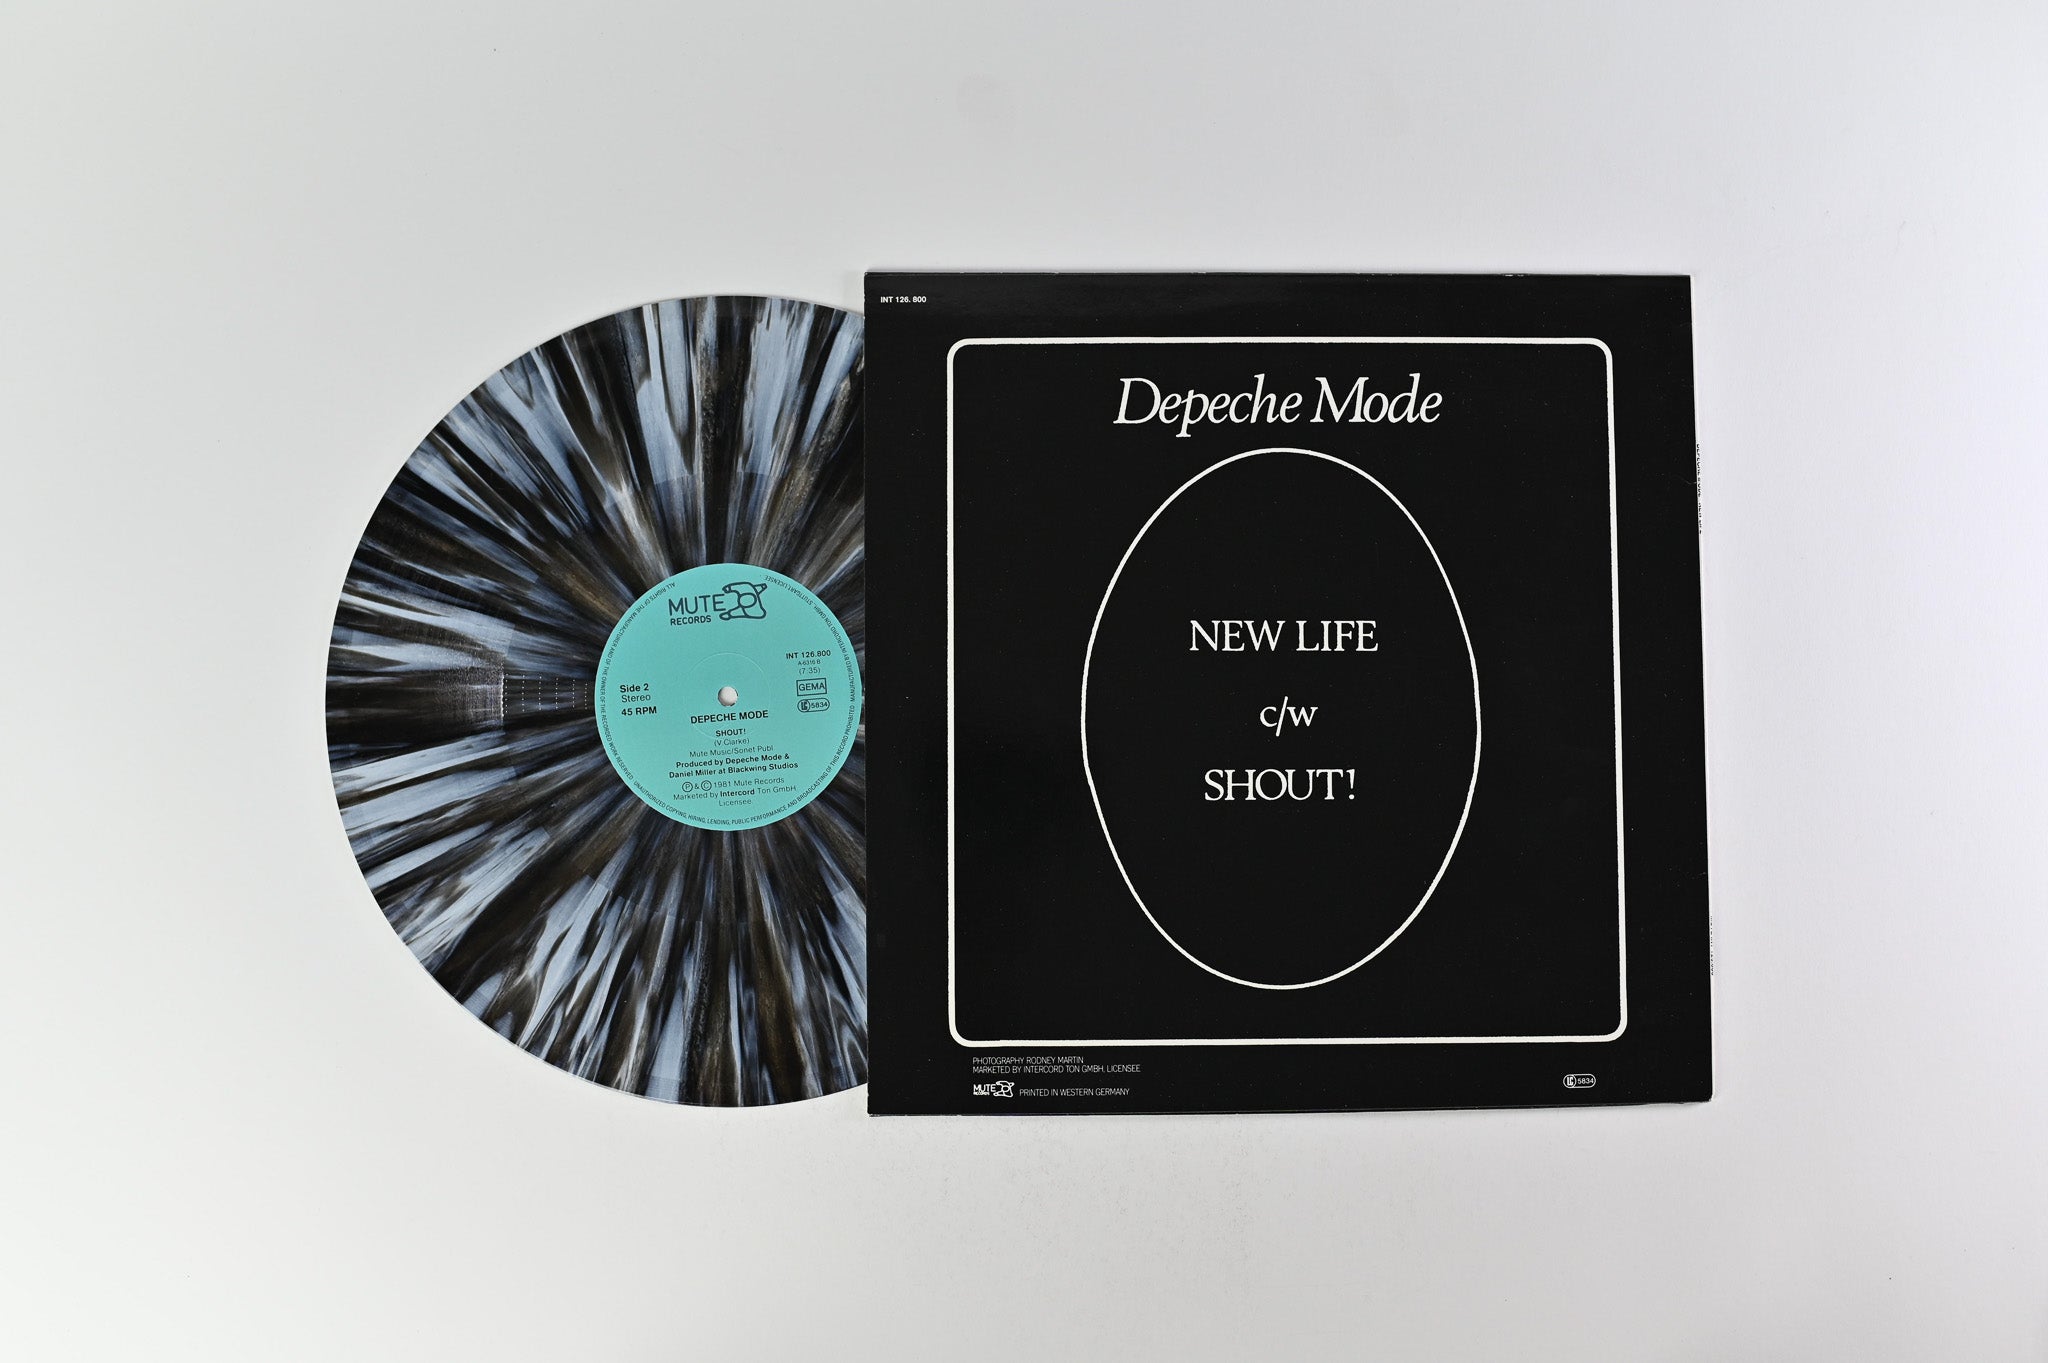 Depeche Mode - New Life on Mute German 45 RPM 12" Single Grey Marbled Reissue